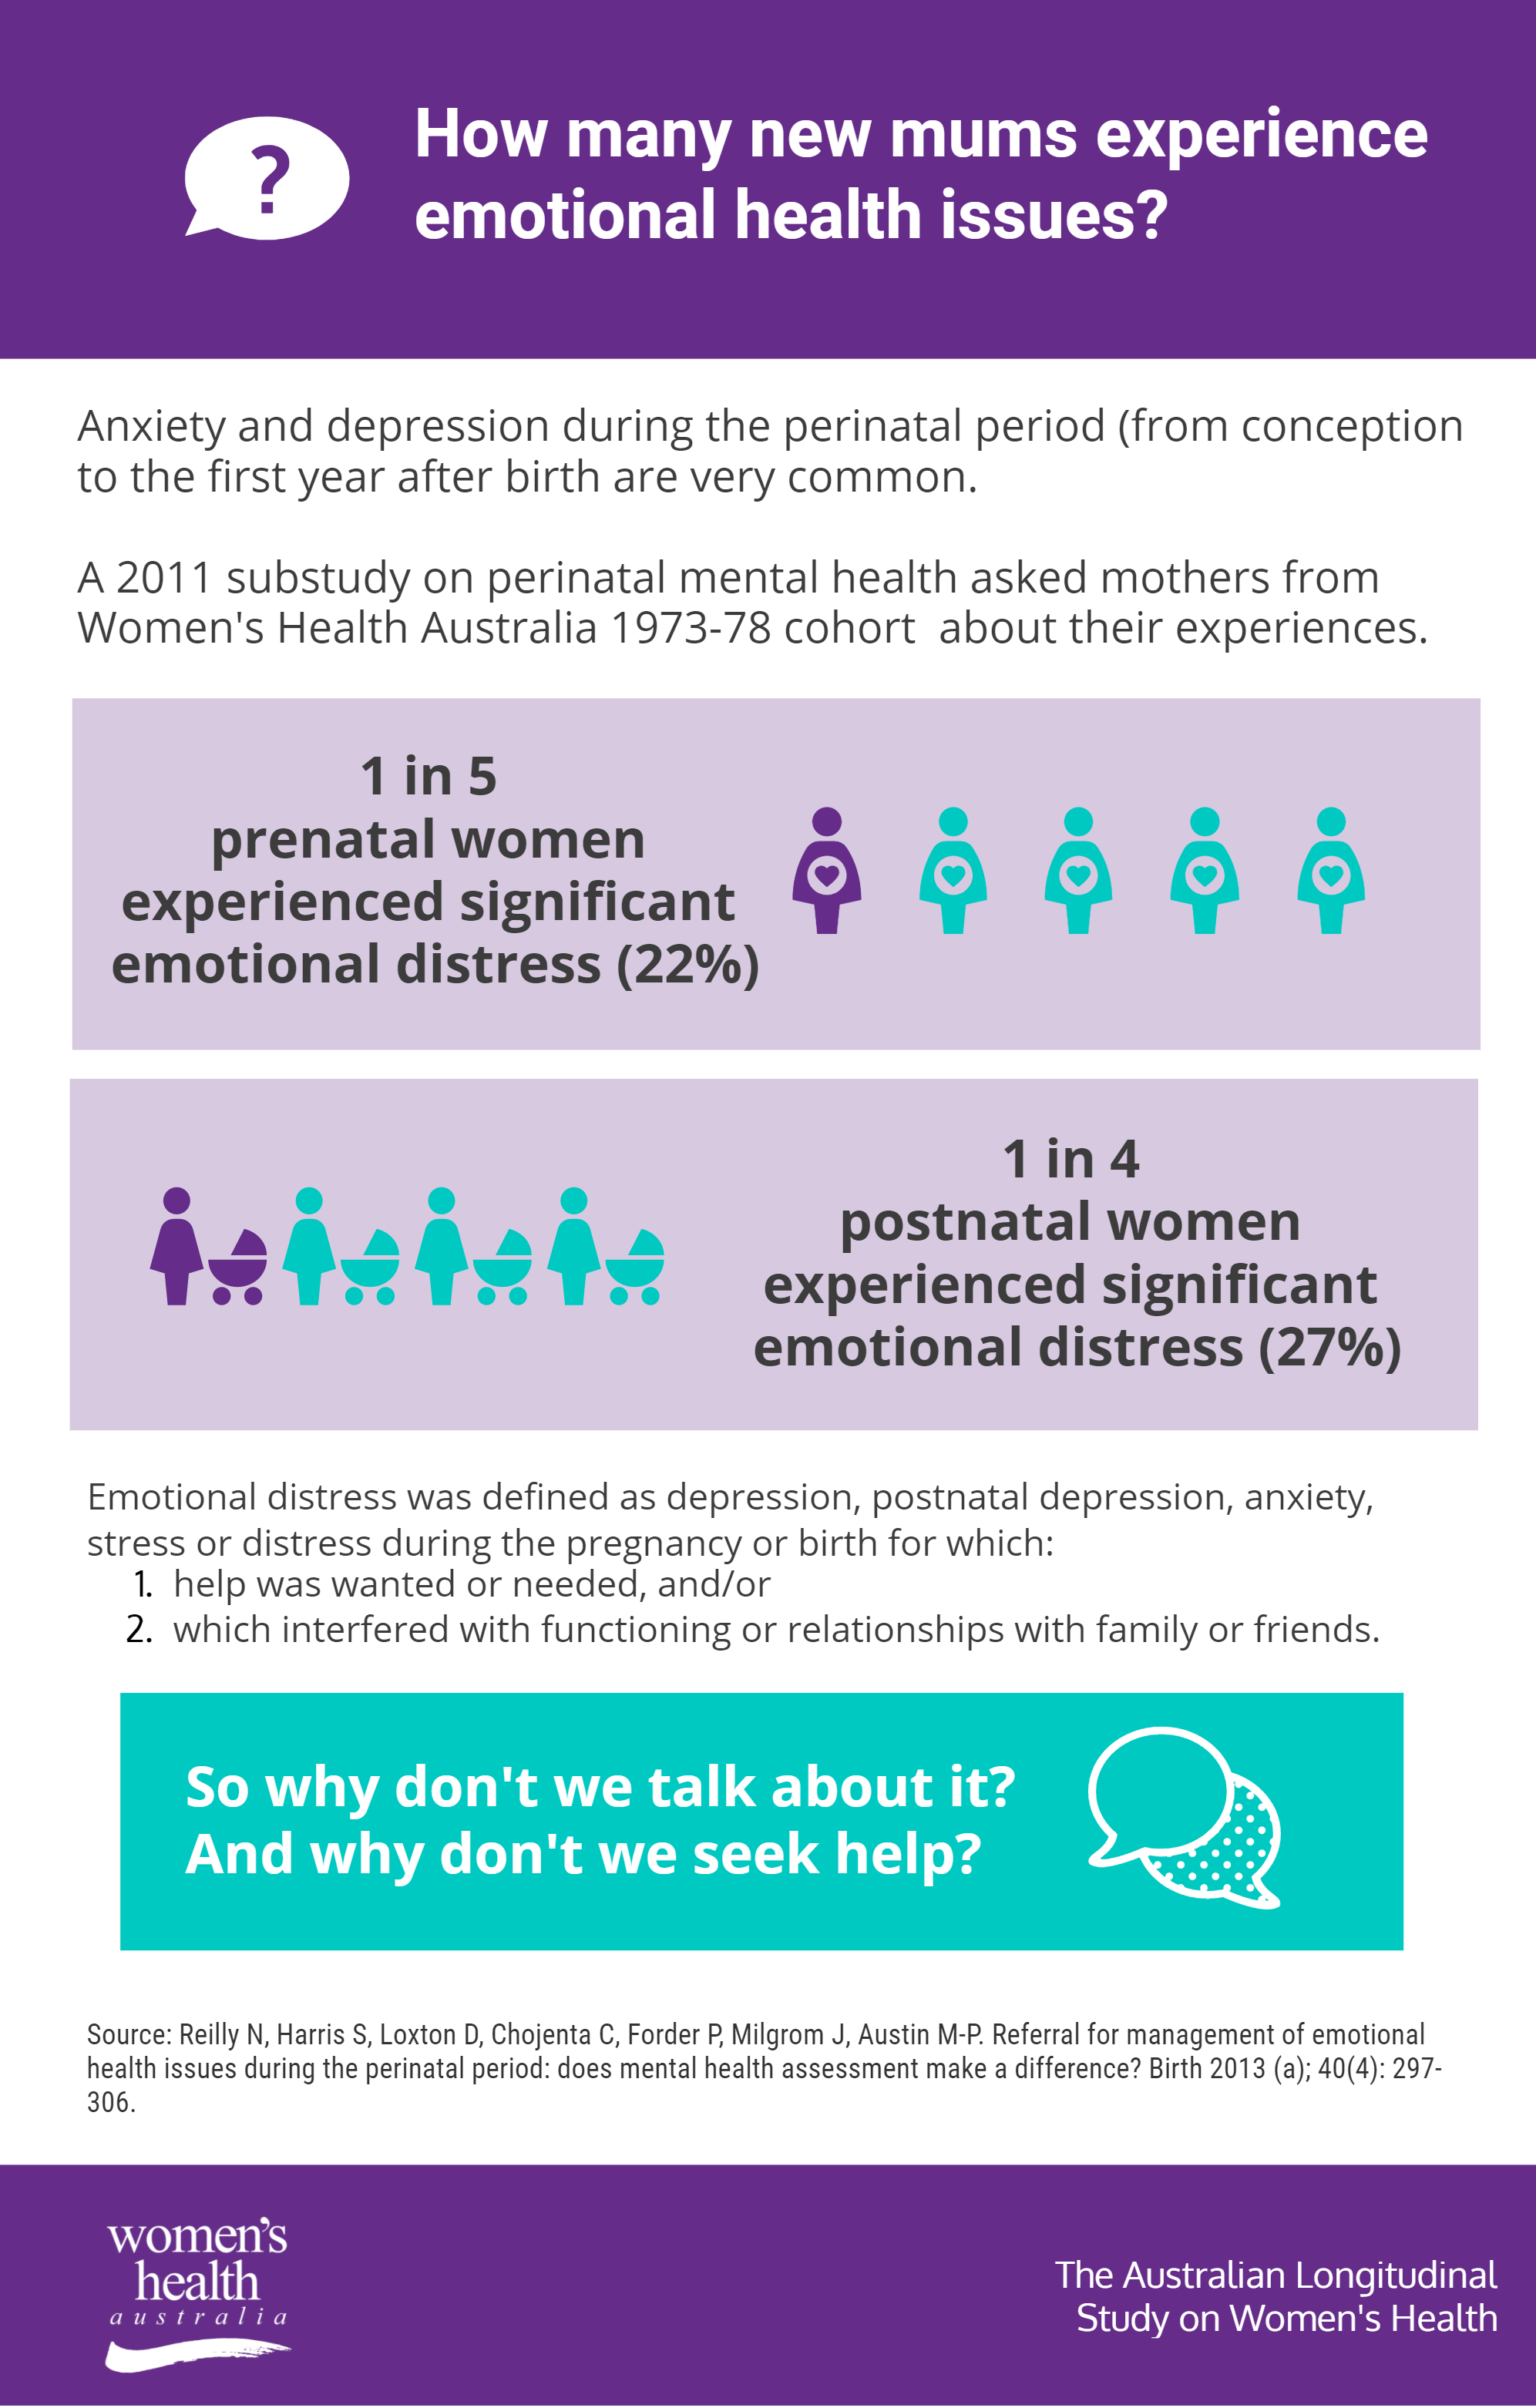 Improving Mental Health for New Mums